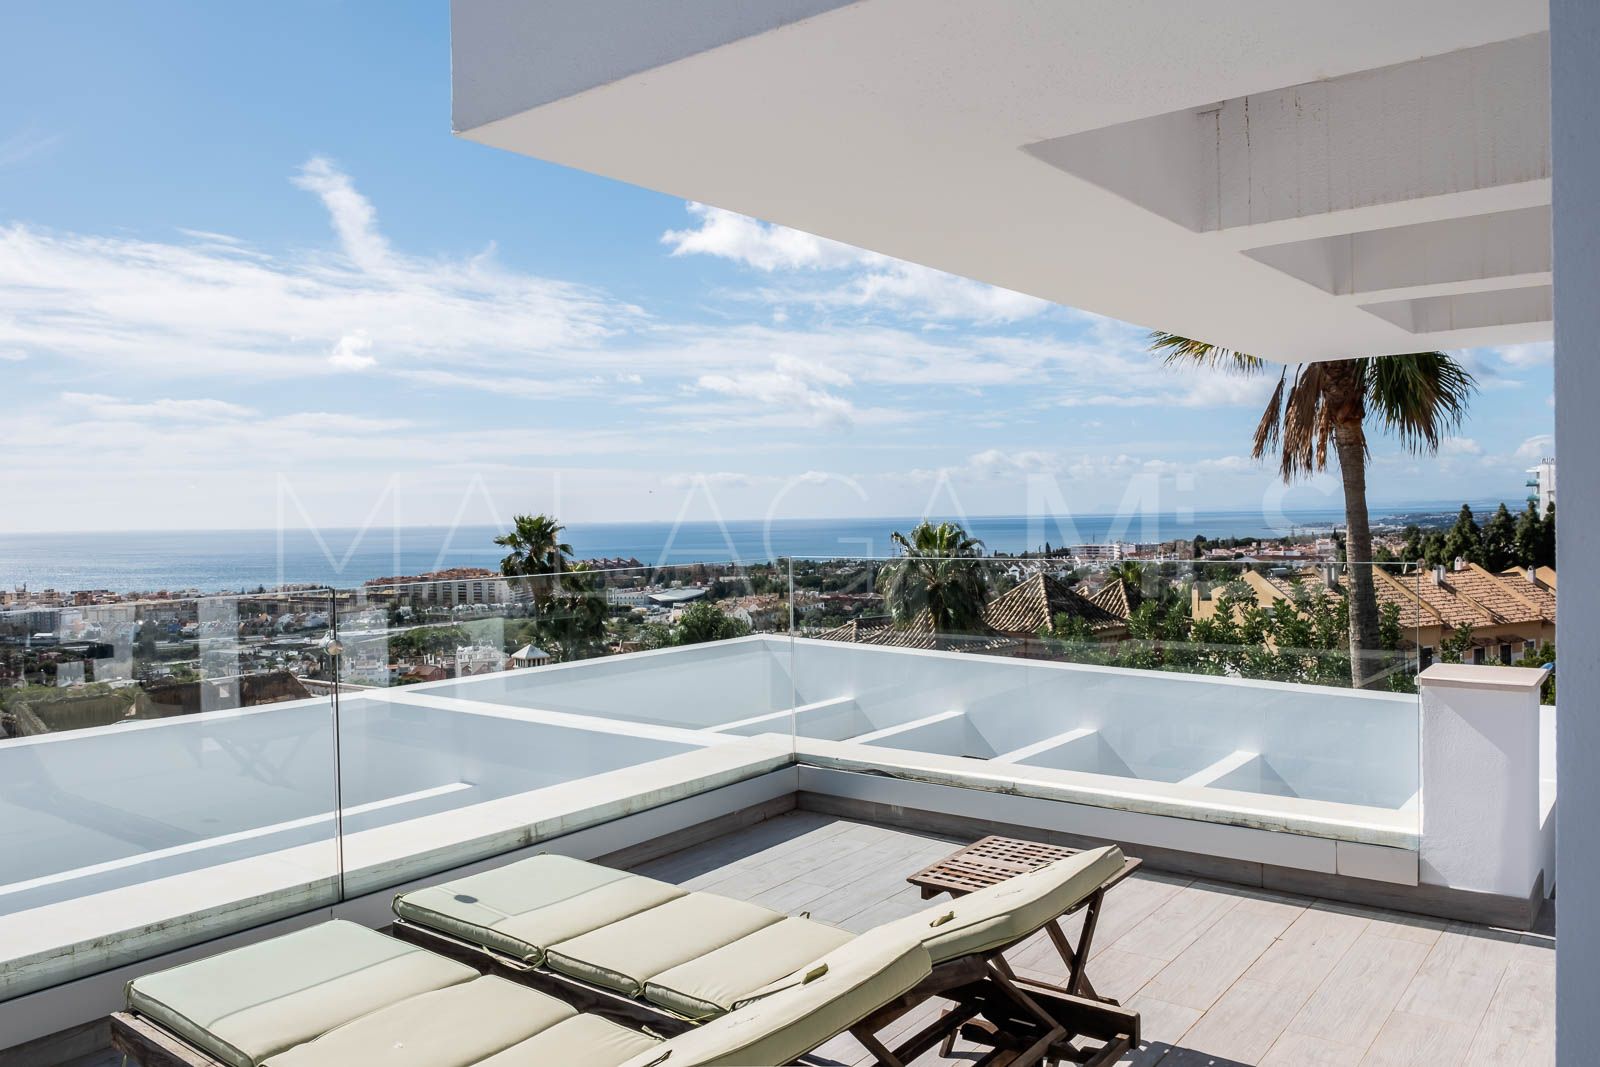 Villa for sale in Marbella with 5 bedrooms